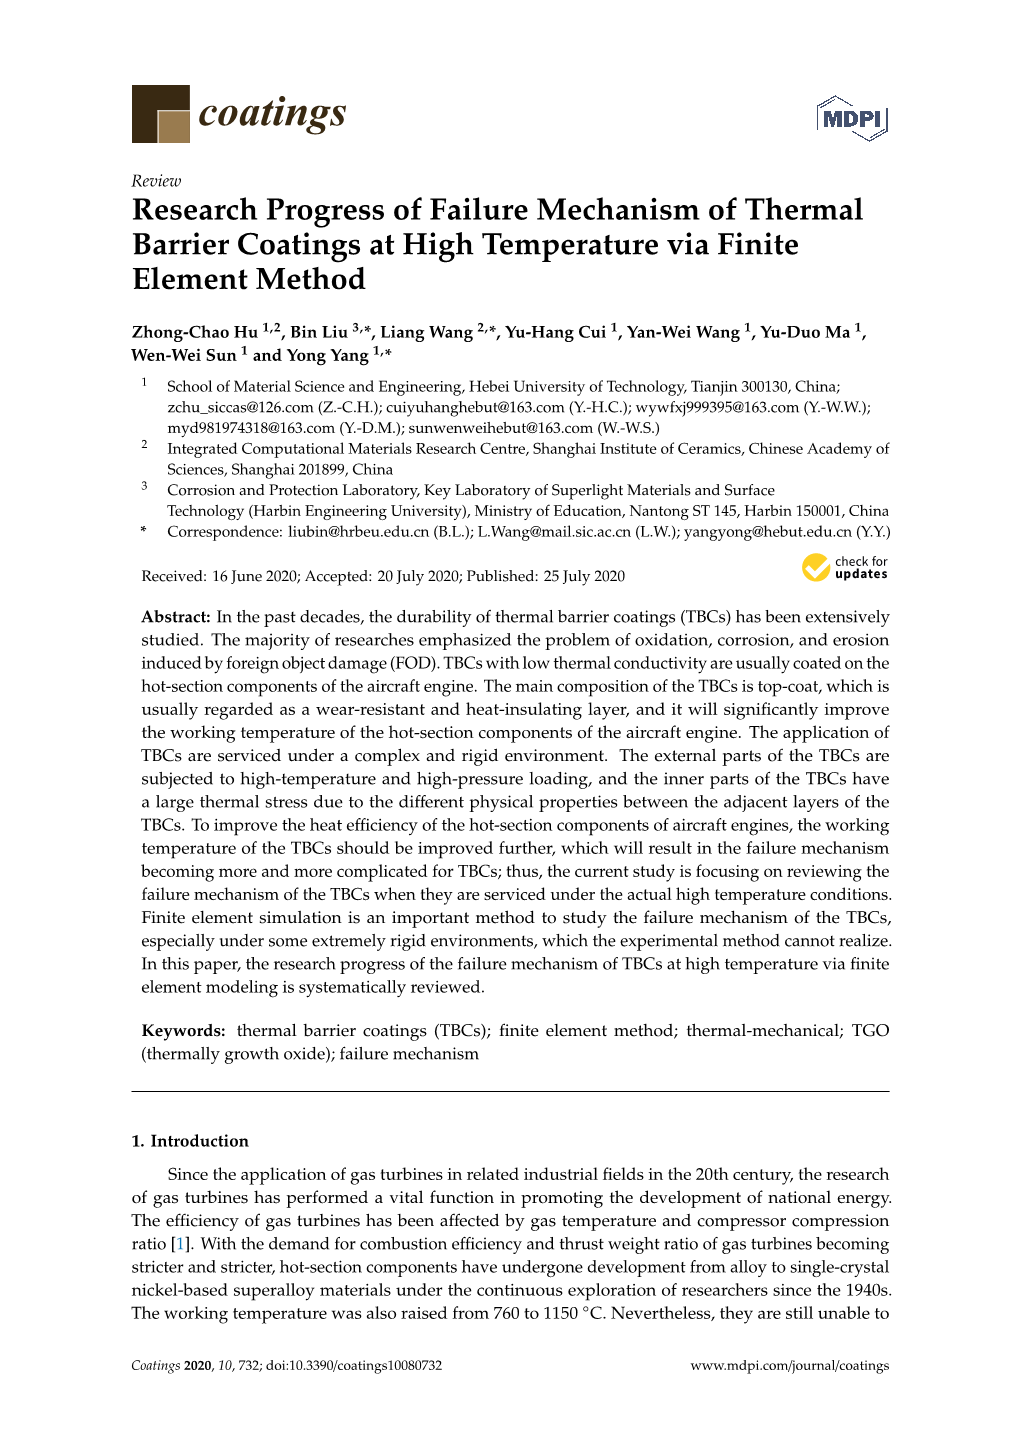 Research Progress of Failure Mechanism of Thermal Barrier Coatings at High Temperature Via Finite Element Method